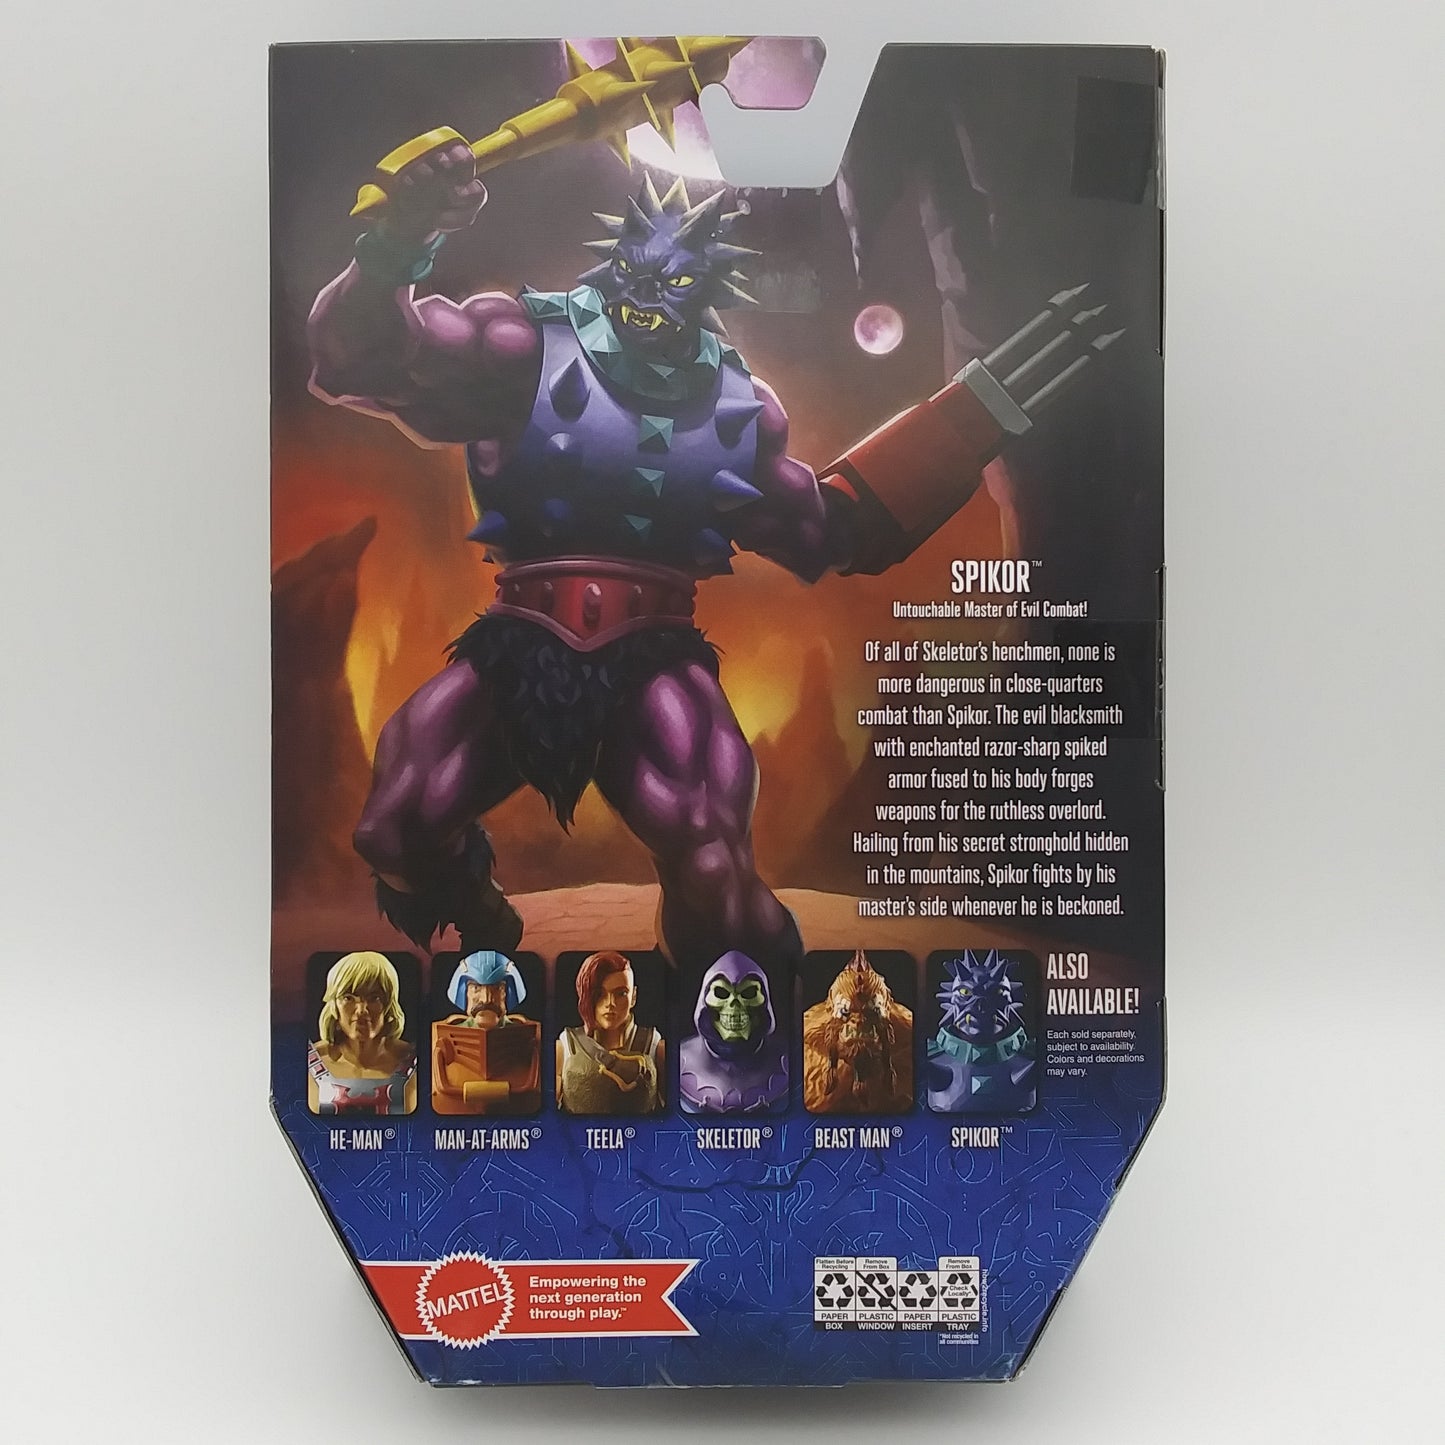 The back of the card featuring images of the action figure and a summary of information about them. It is illegible in the picture.